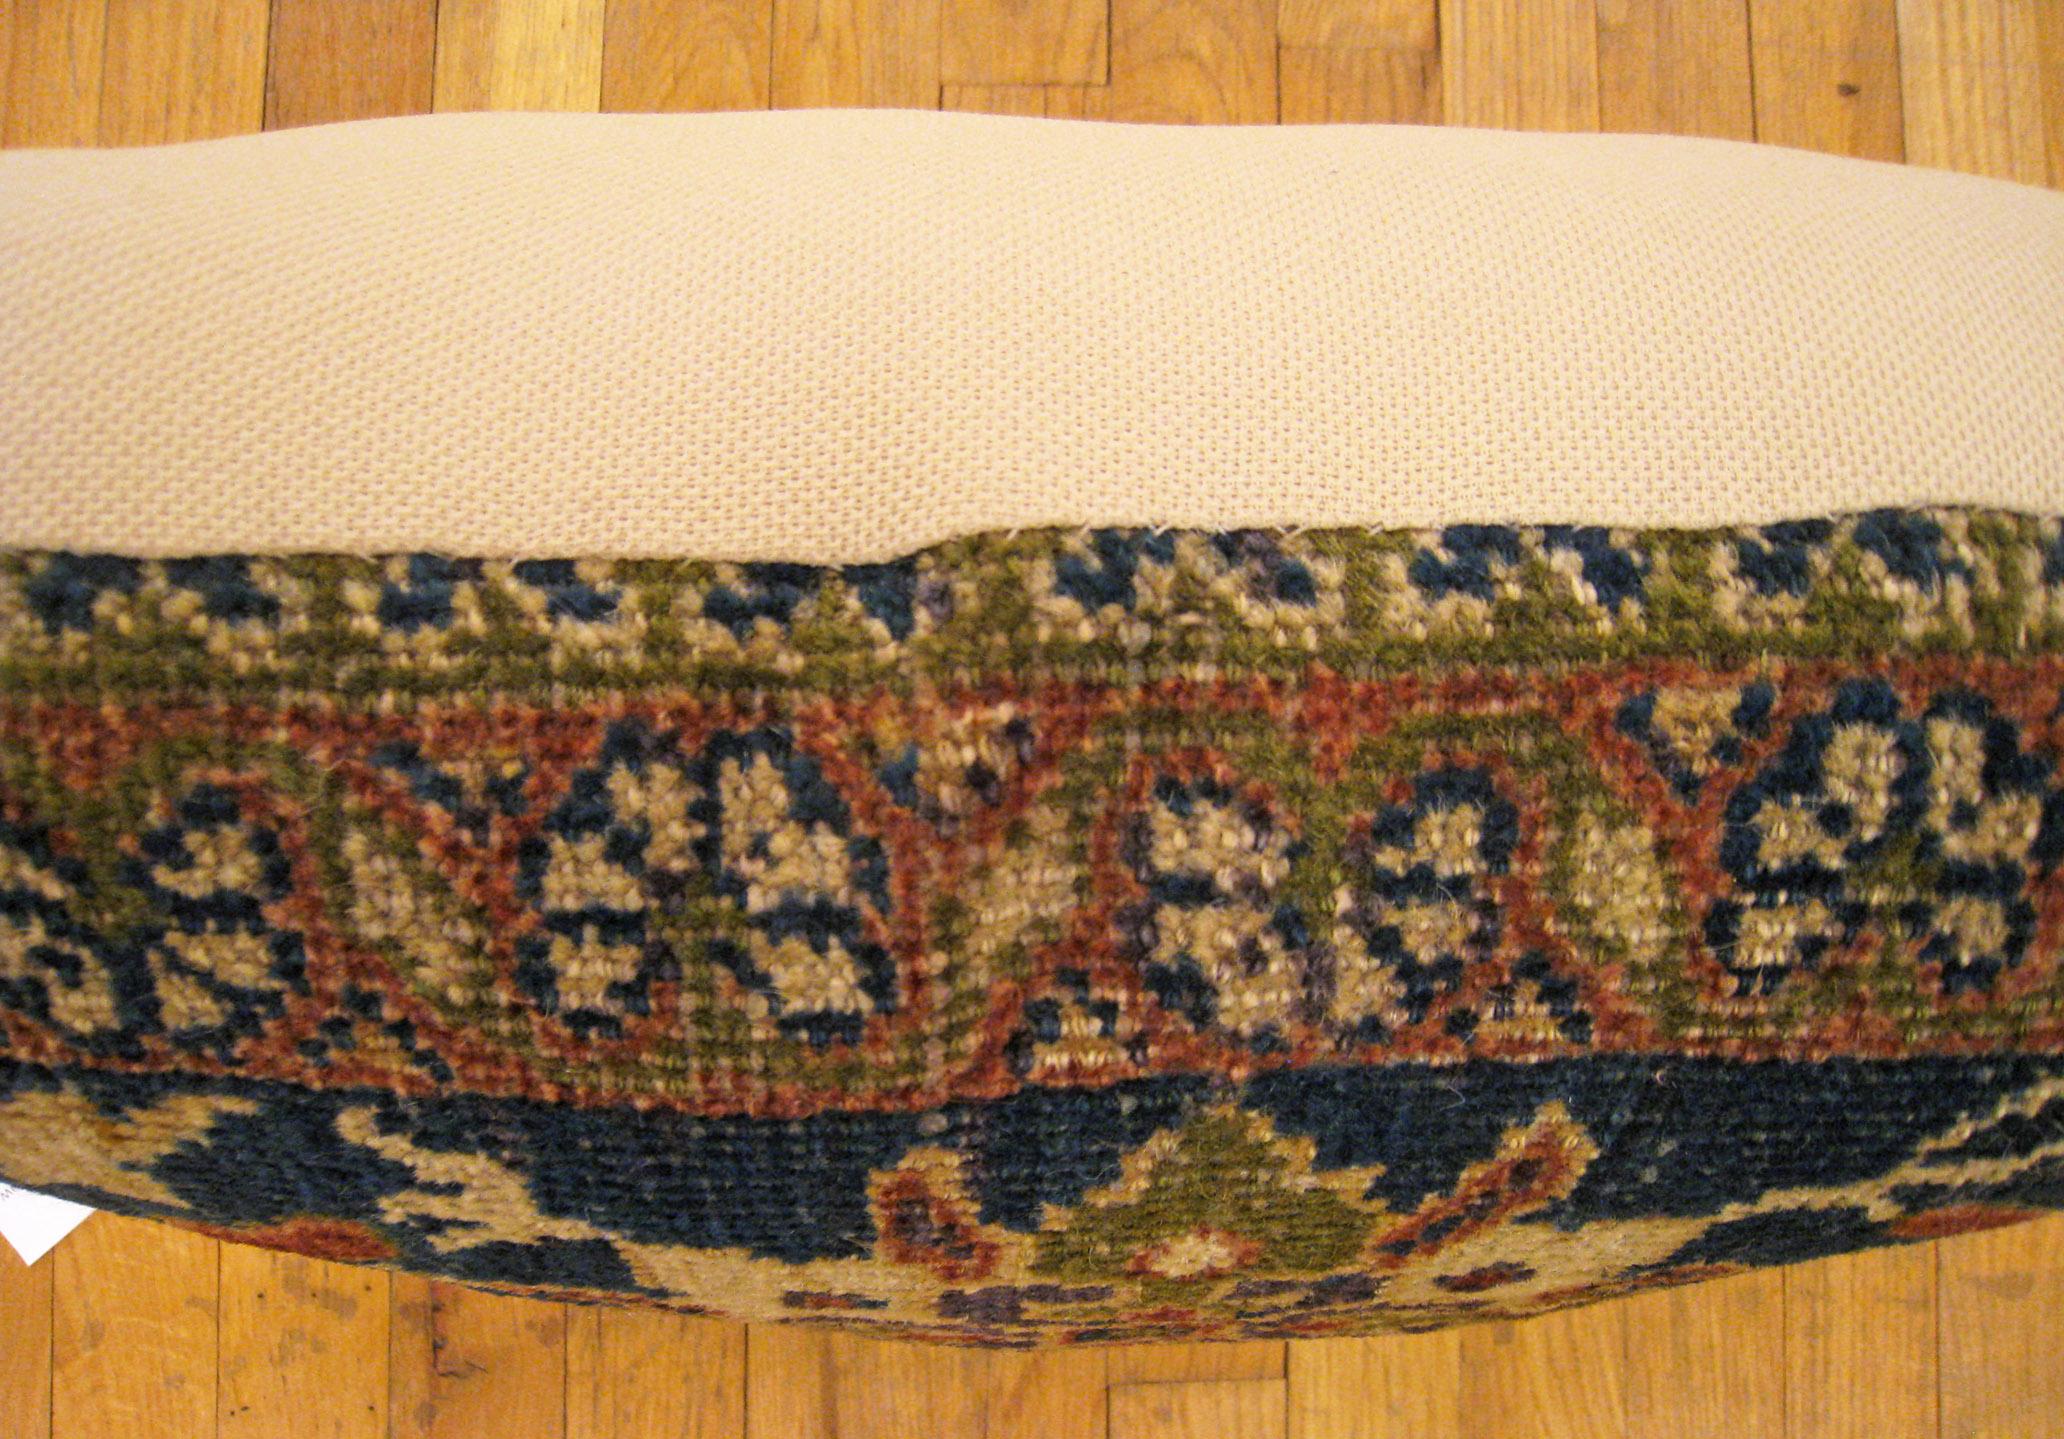 Decorative Antique Persian Sultanabad Carpet Pillow with Floral Elements In Fair Condition For Sale In New York, NY